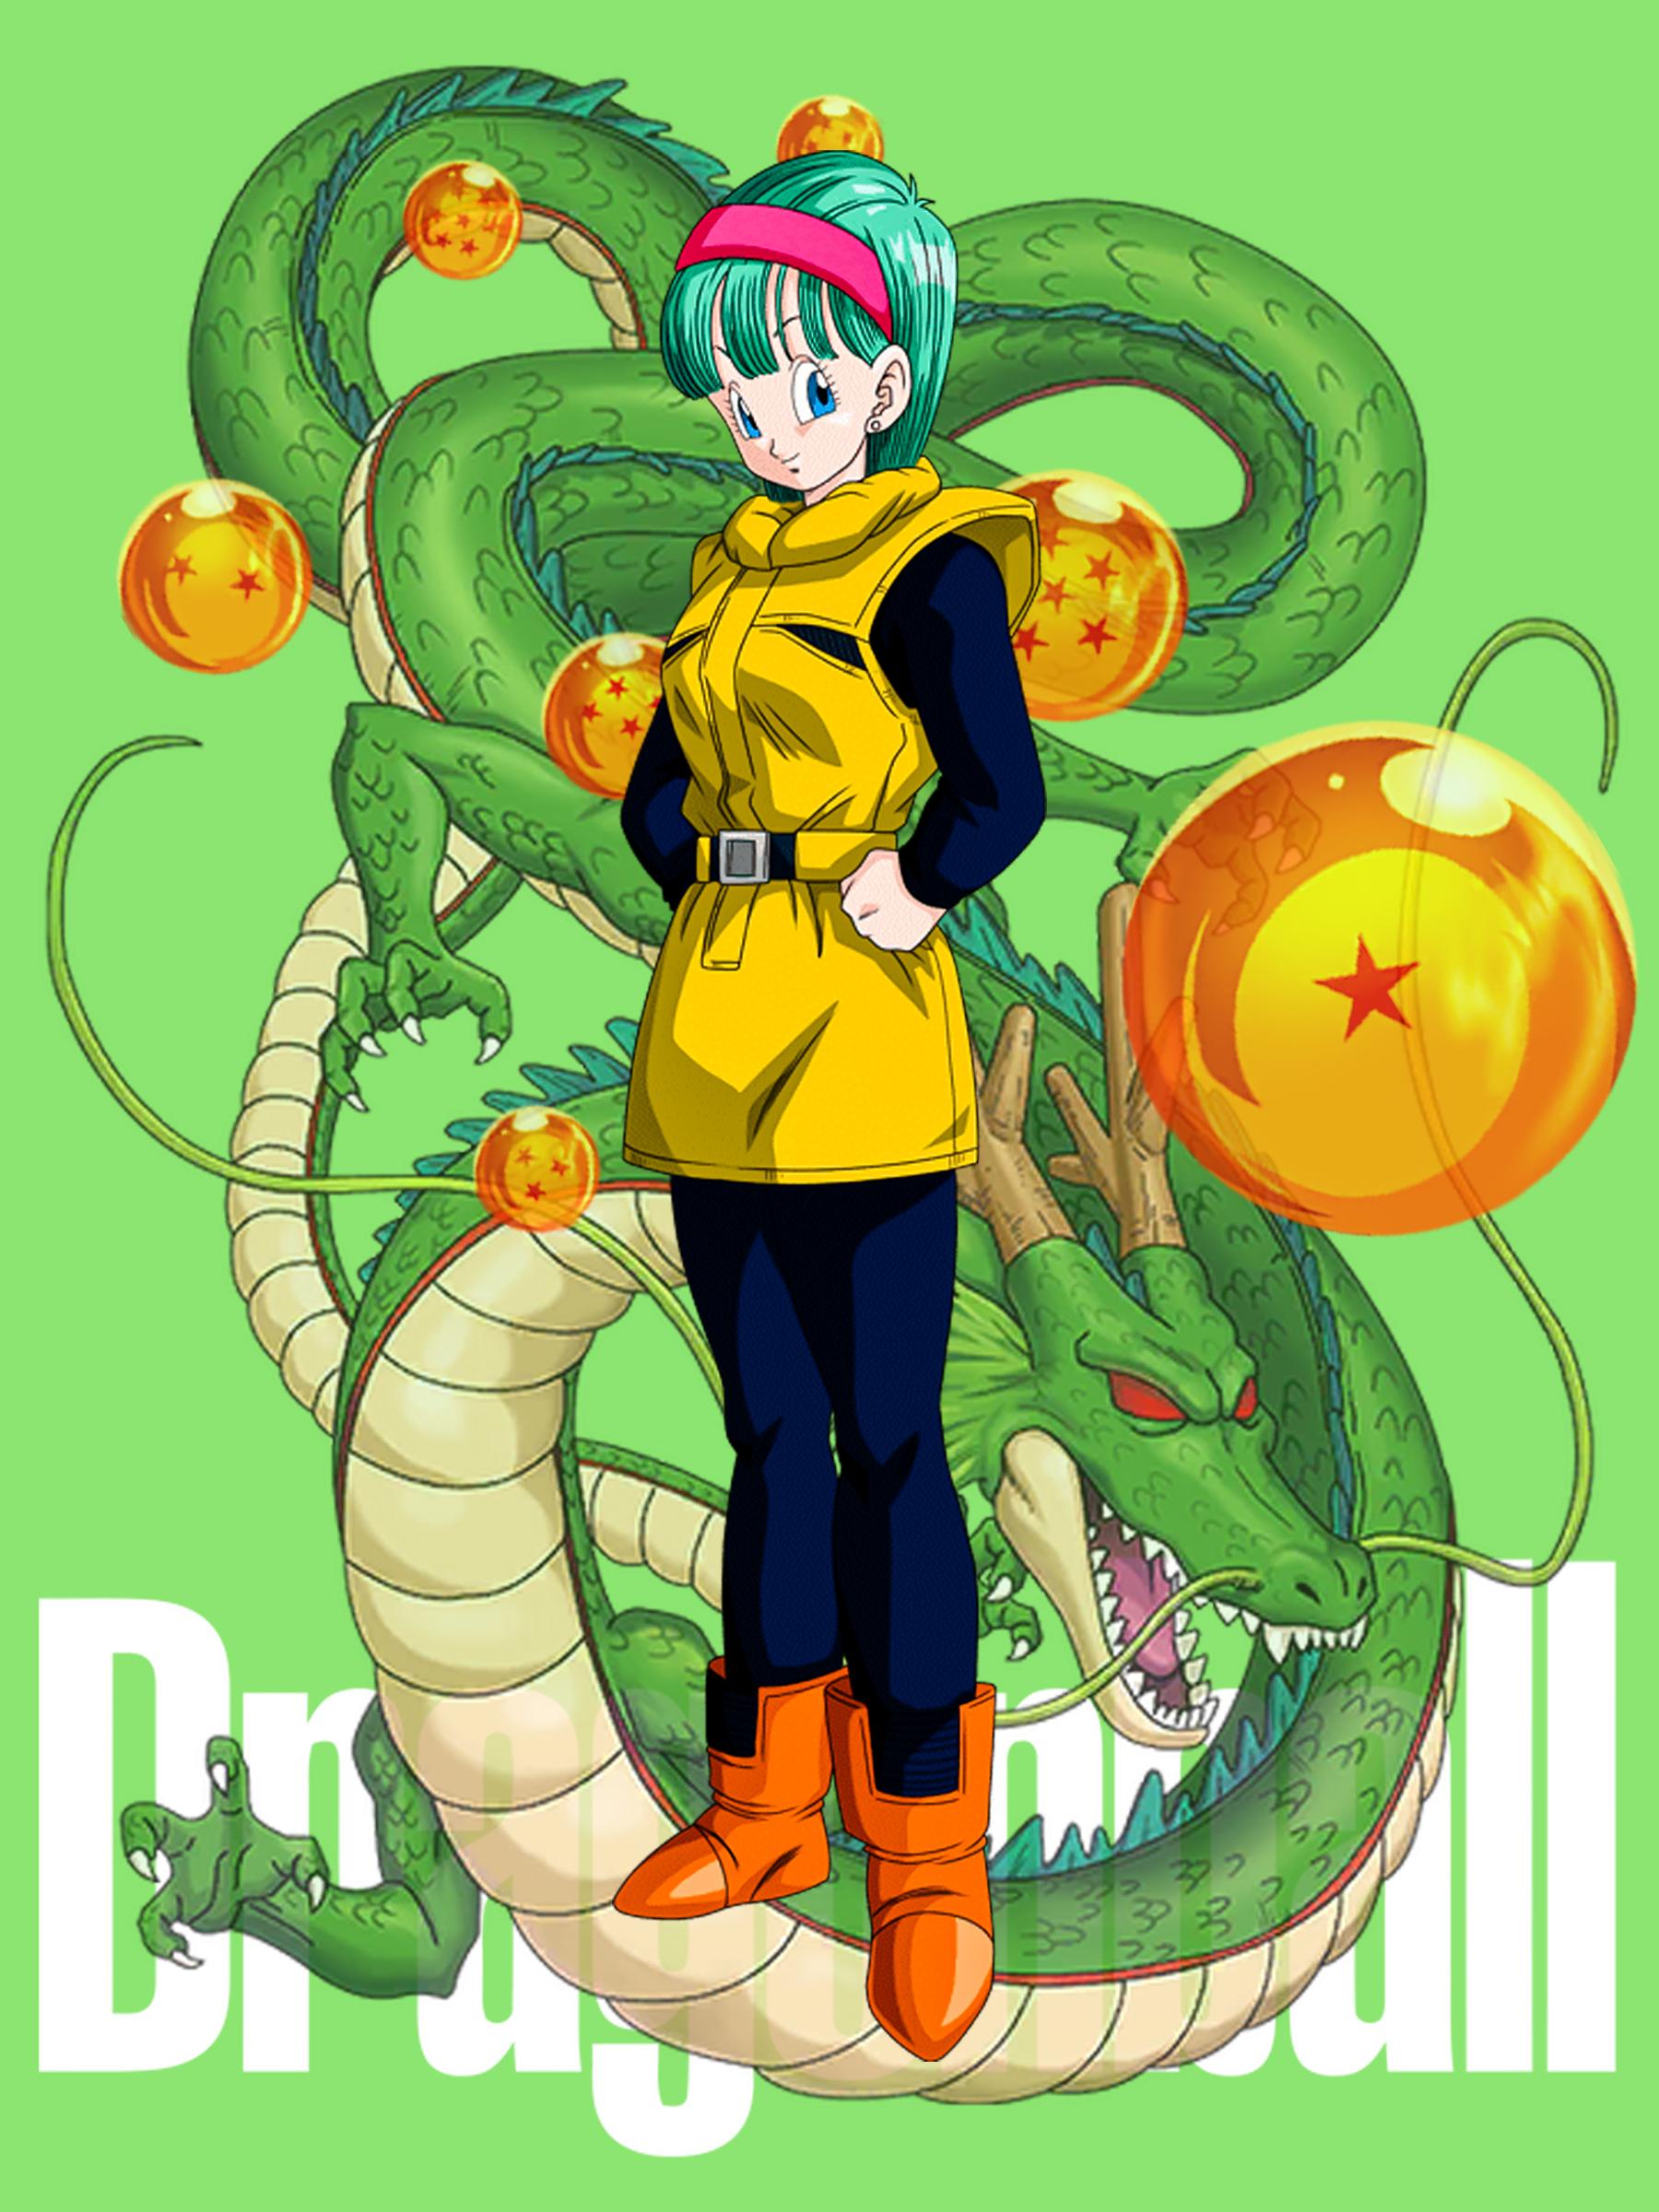 Download wallpaper 840x1336 bulma and vegeta anime dragon ball minimal  iphone 5 iphone 5s iphone 5c ipod touch 840x1336 hd background 6488